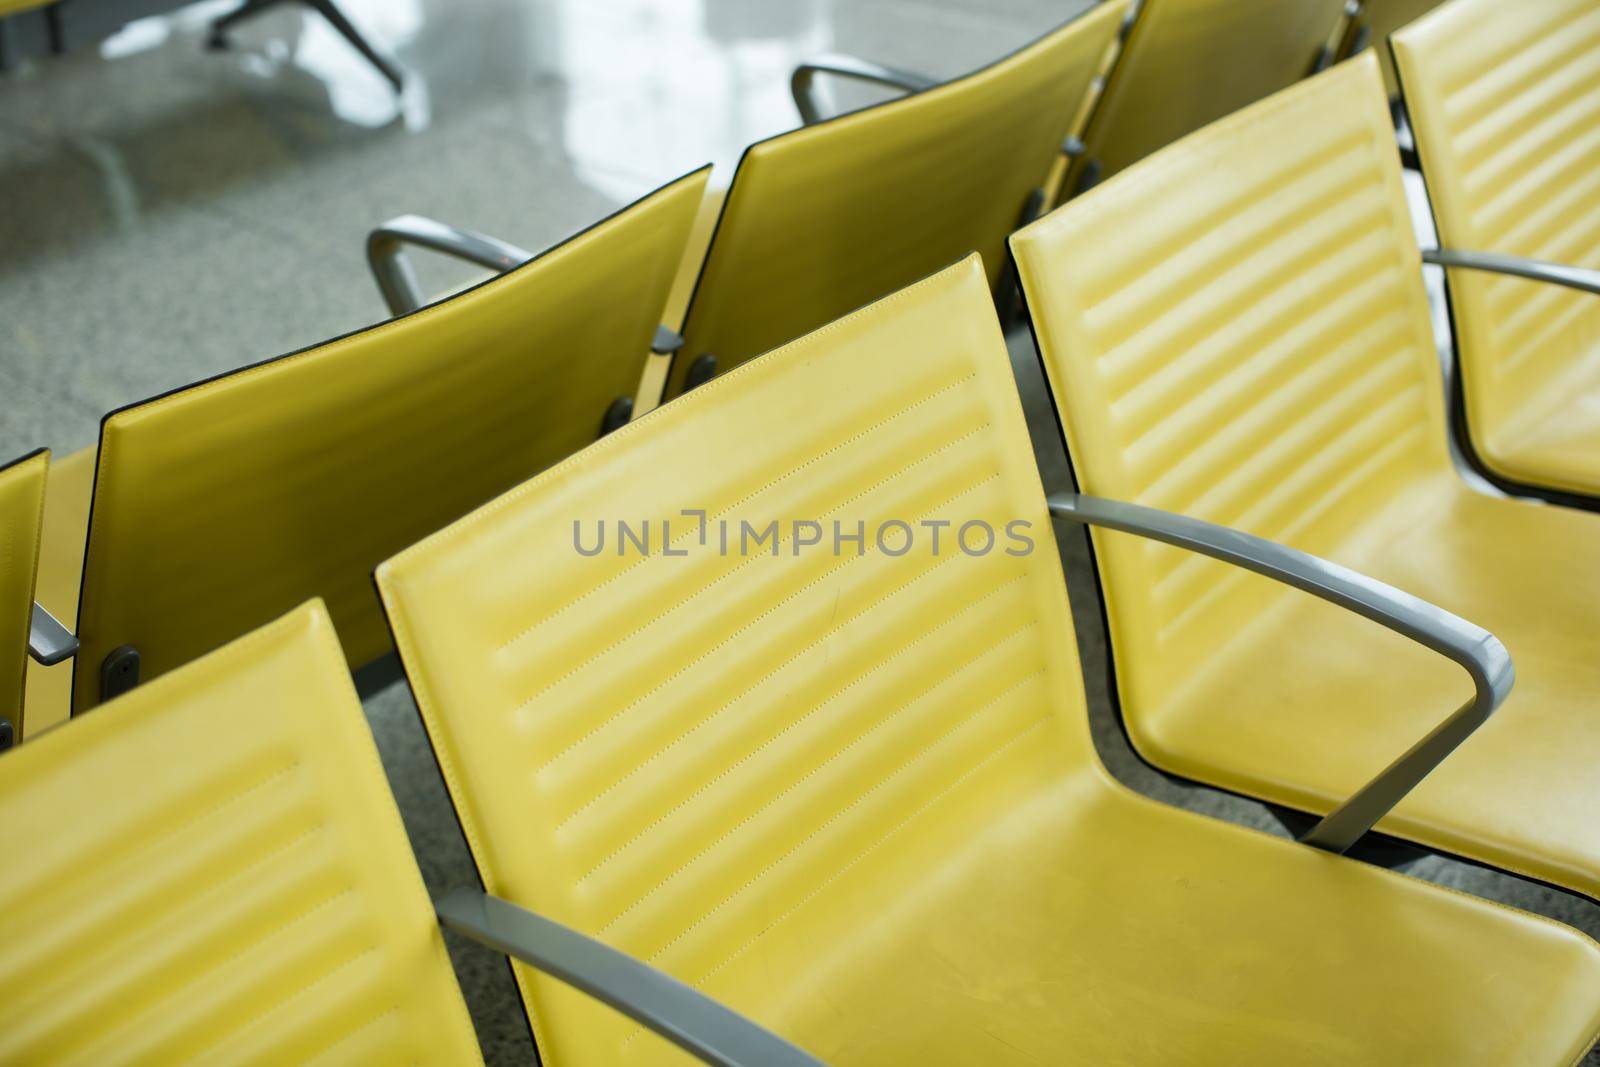 Bench in the terminal of airport. empty airport terminal waiting area with chairs.